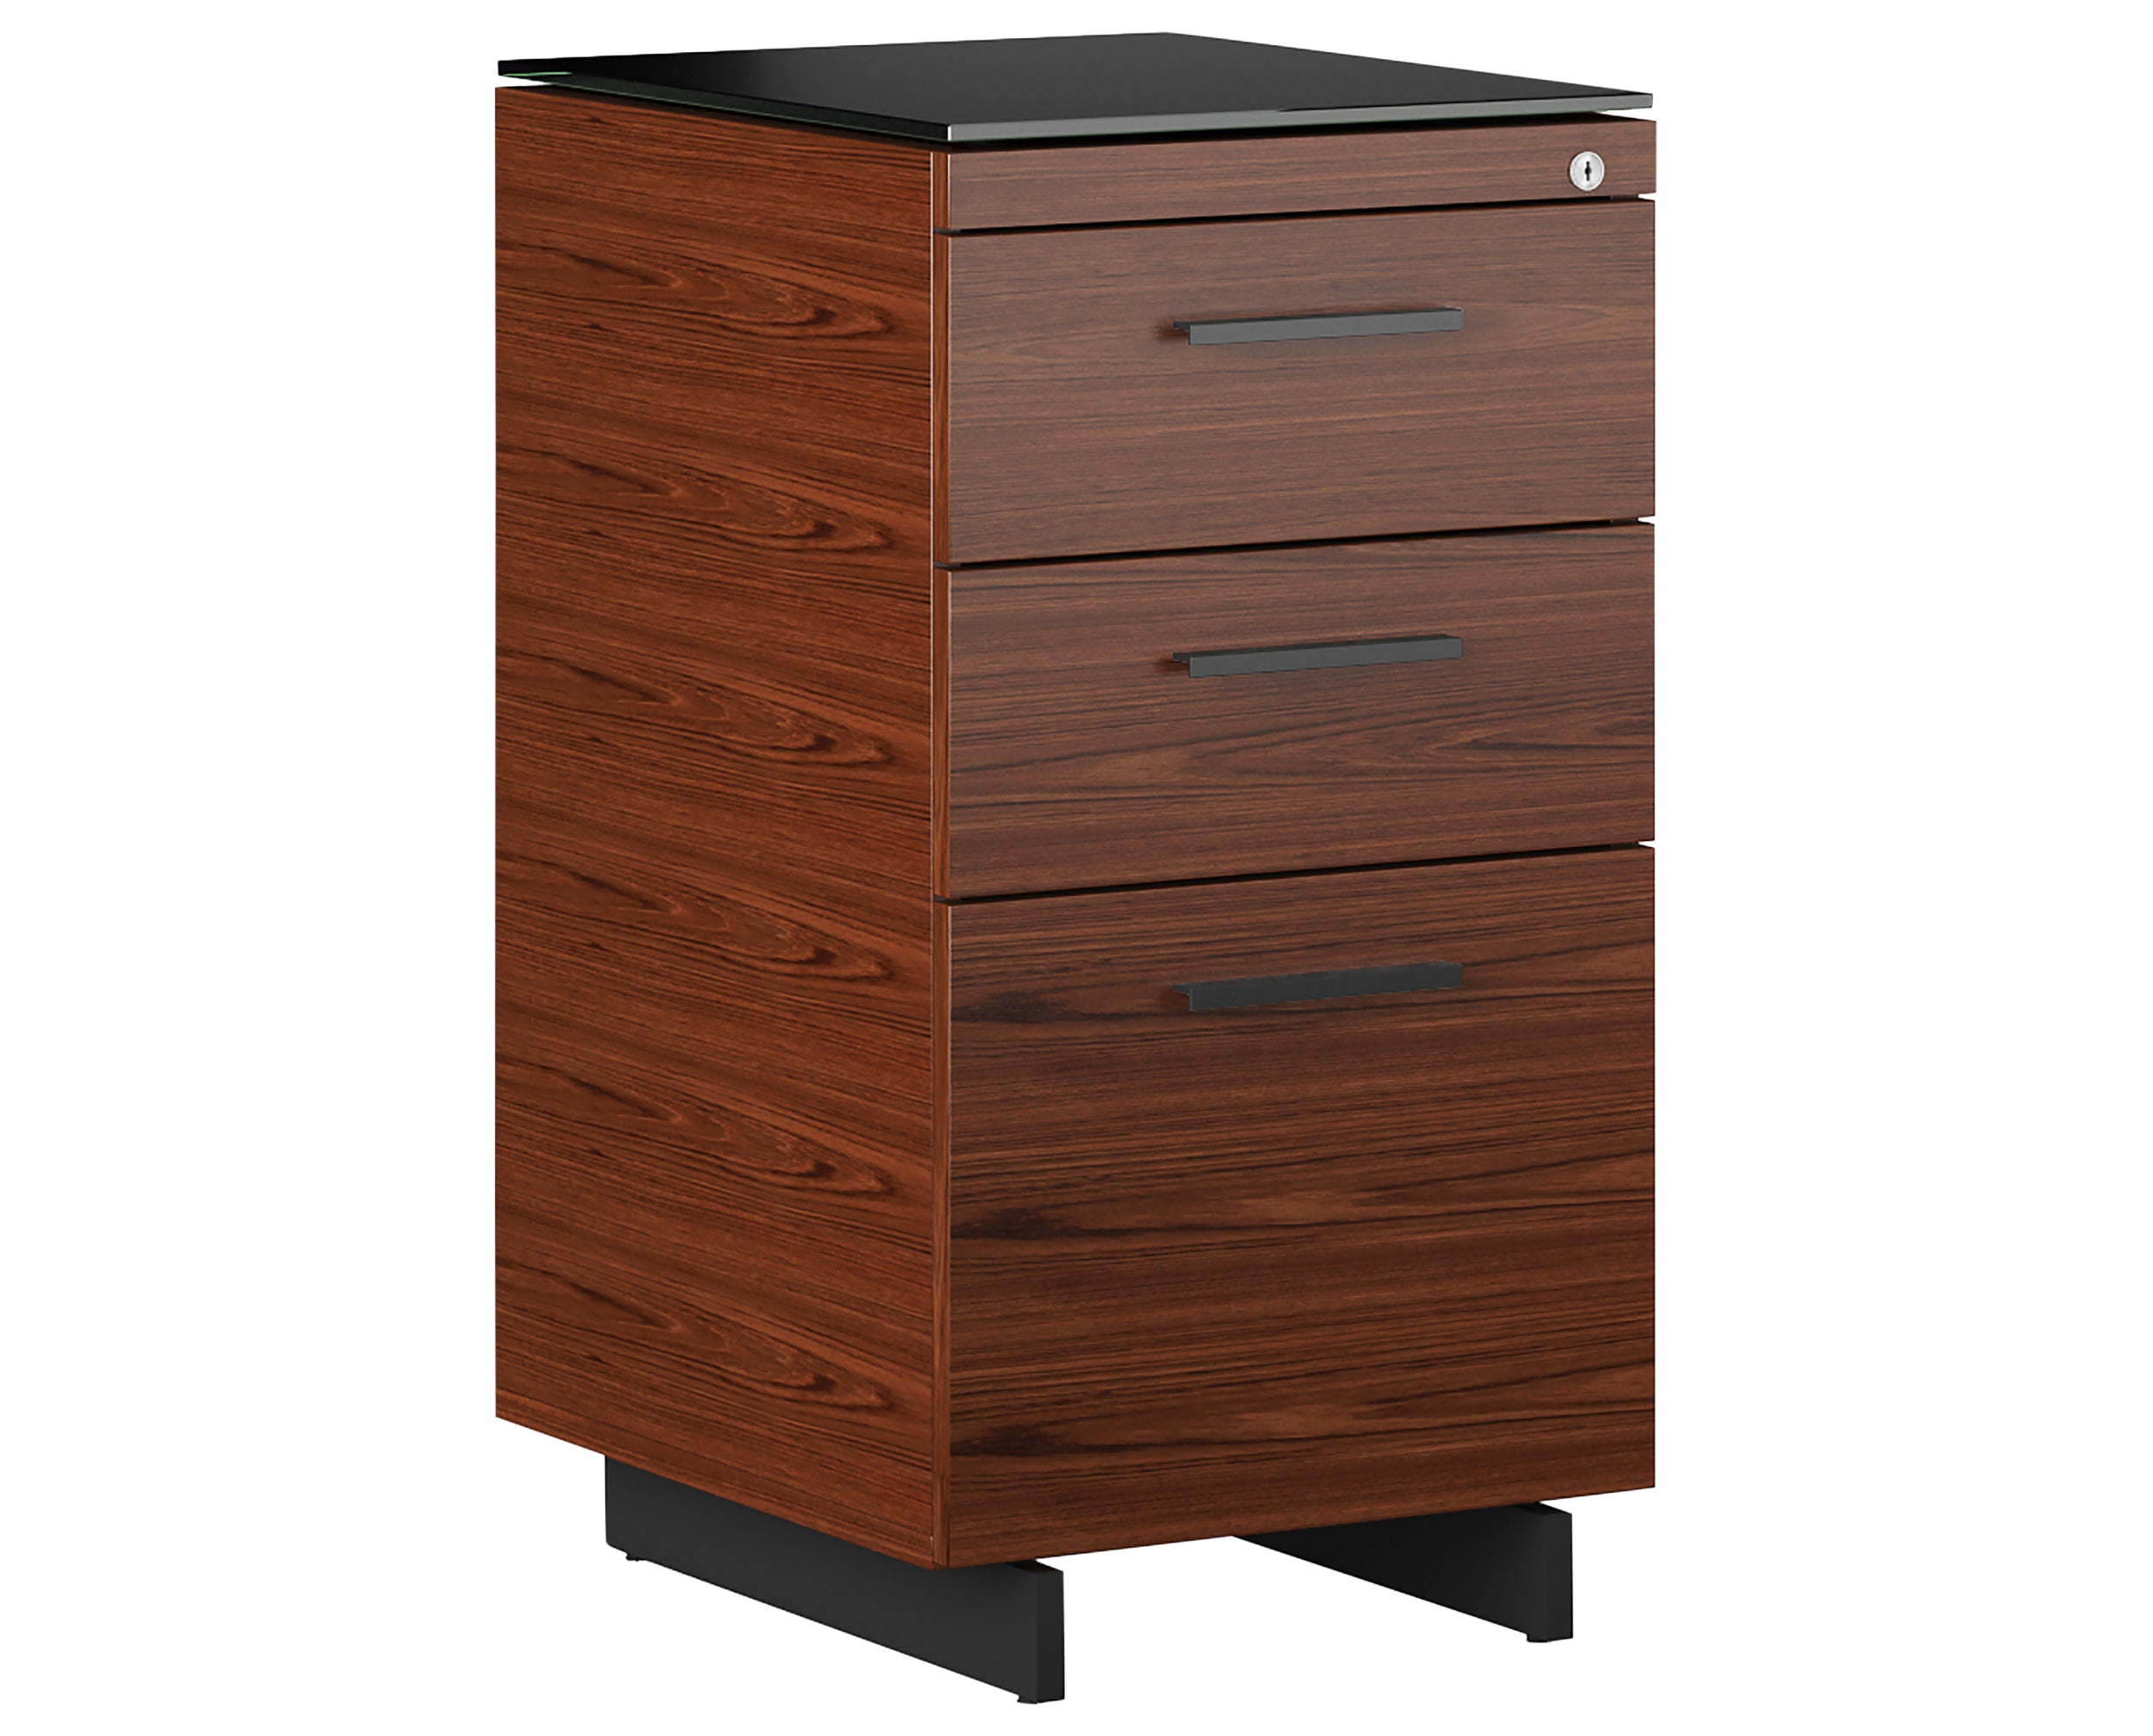 Chocolate Walnut Veneer and Black Satin-Etched Glass with Black Steel | BDI Sequel 3 Drawer File Cabinet | Valley Ridge Furniture